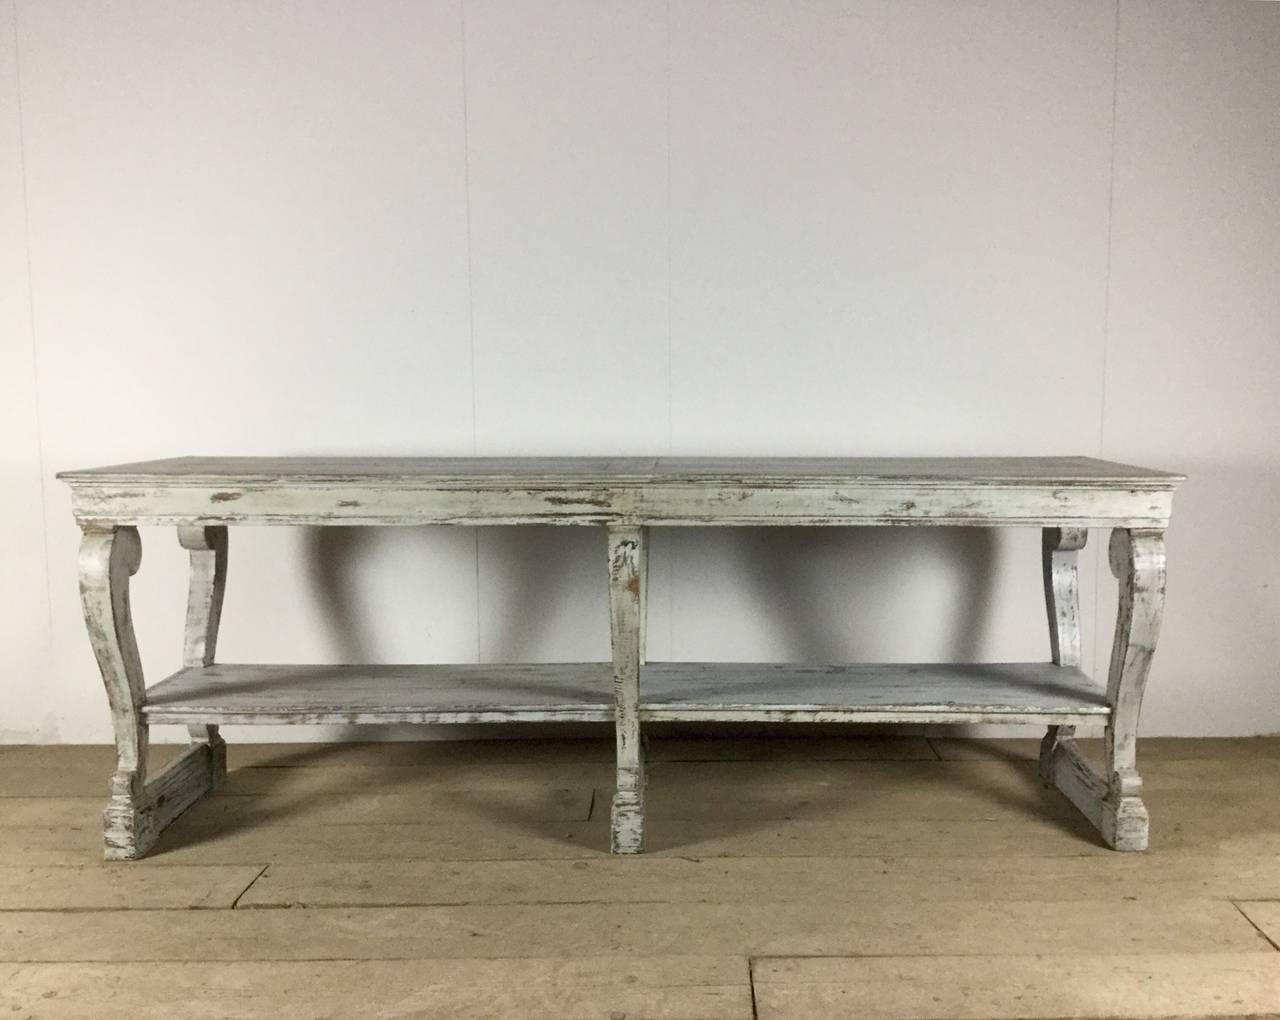 An exceptional painted oak French Charles X draper's table from the Restauration period with parquet tops, three drawers and decorative volute details.  The table's color is a pale dove gray with some of the natural wood peaking through in areas.